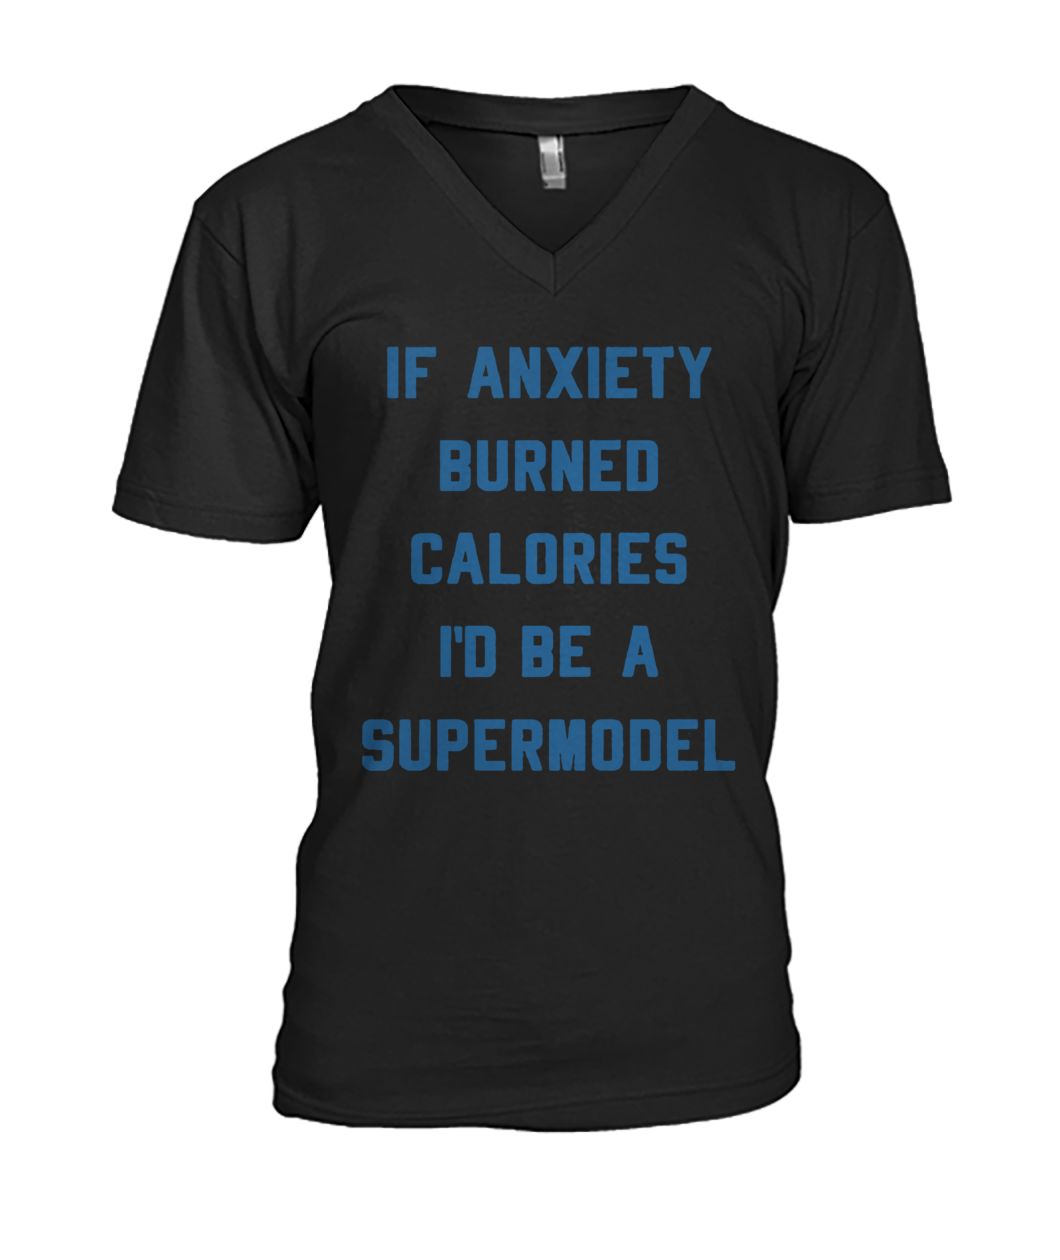 If anxiety burned calories I'd be a supermodel mens v-neck